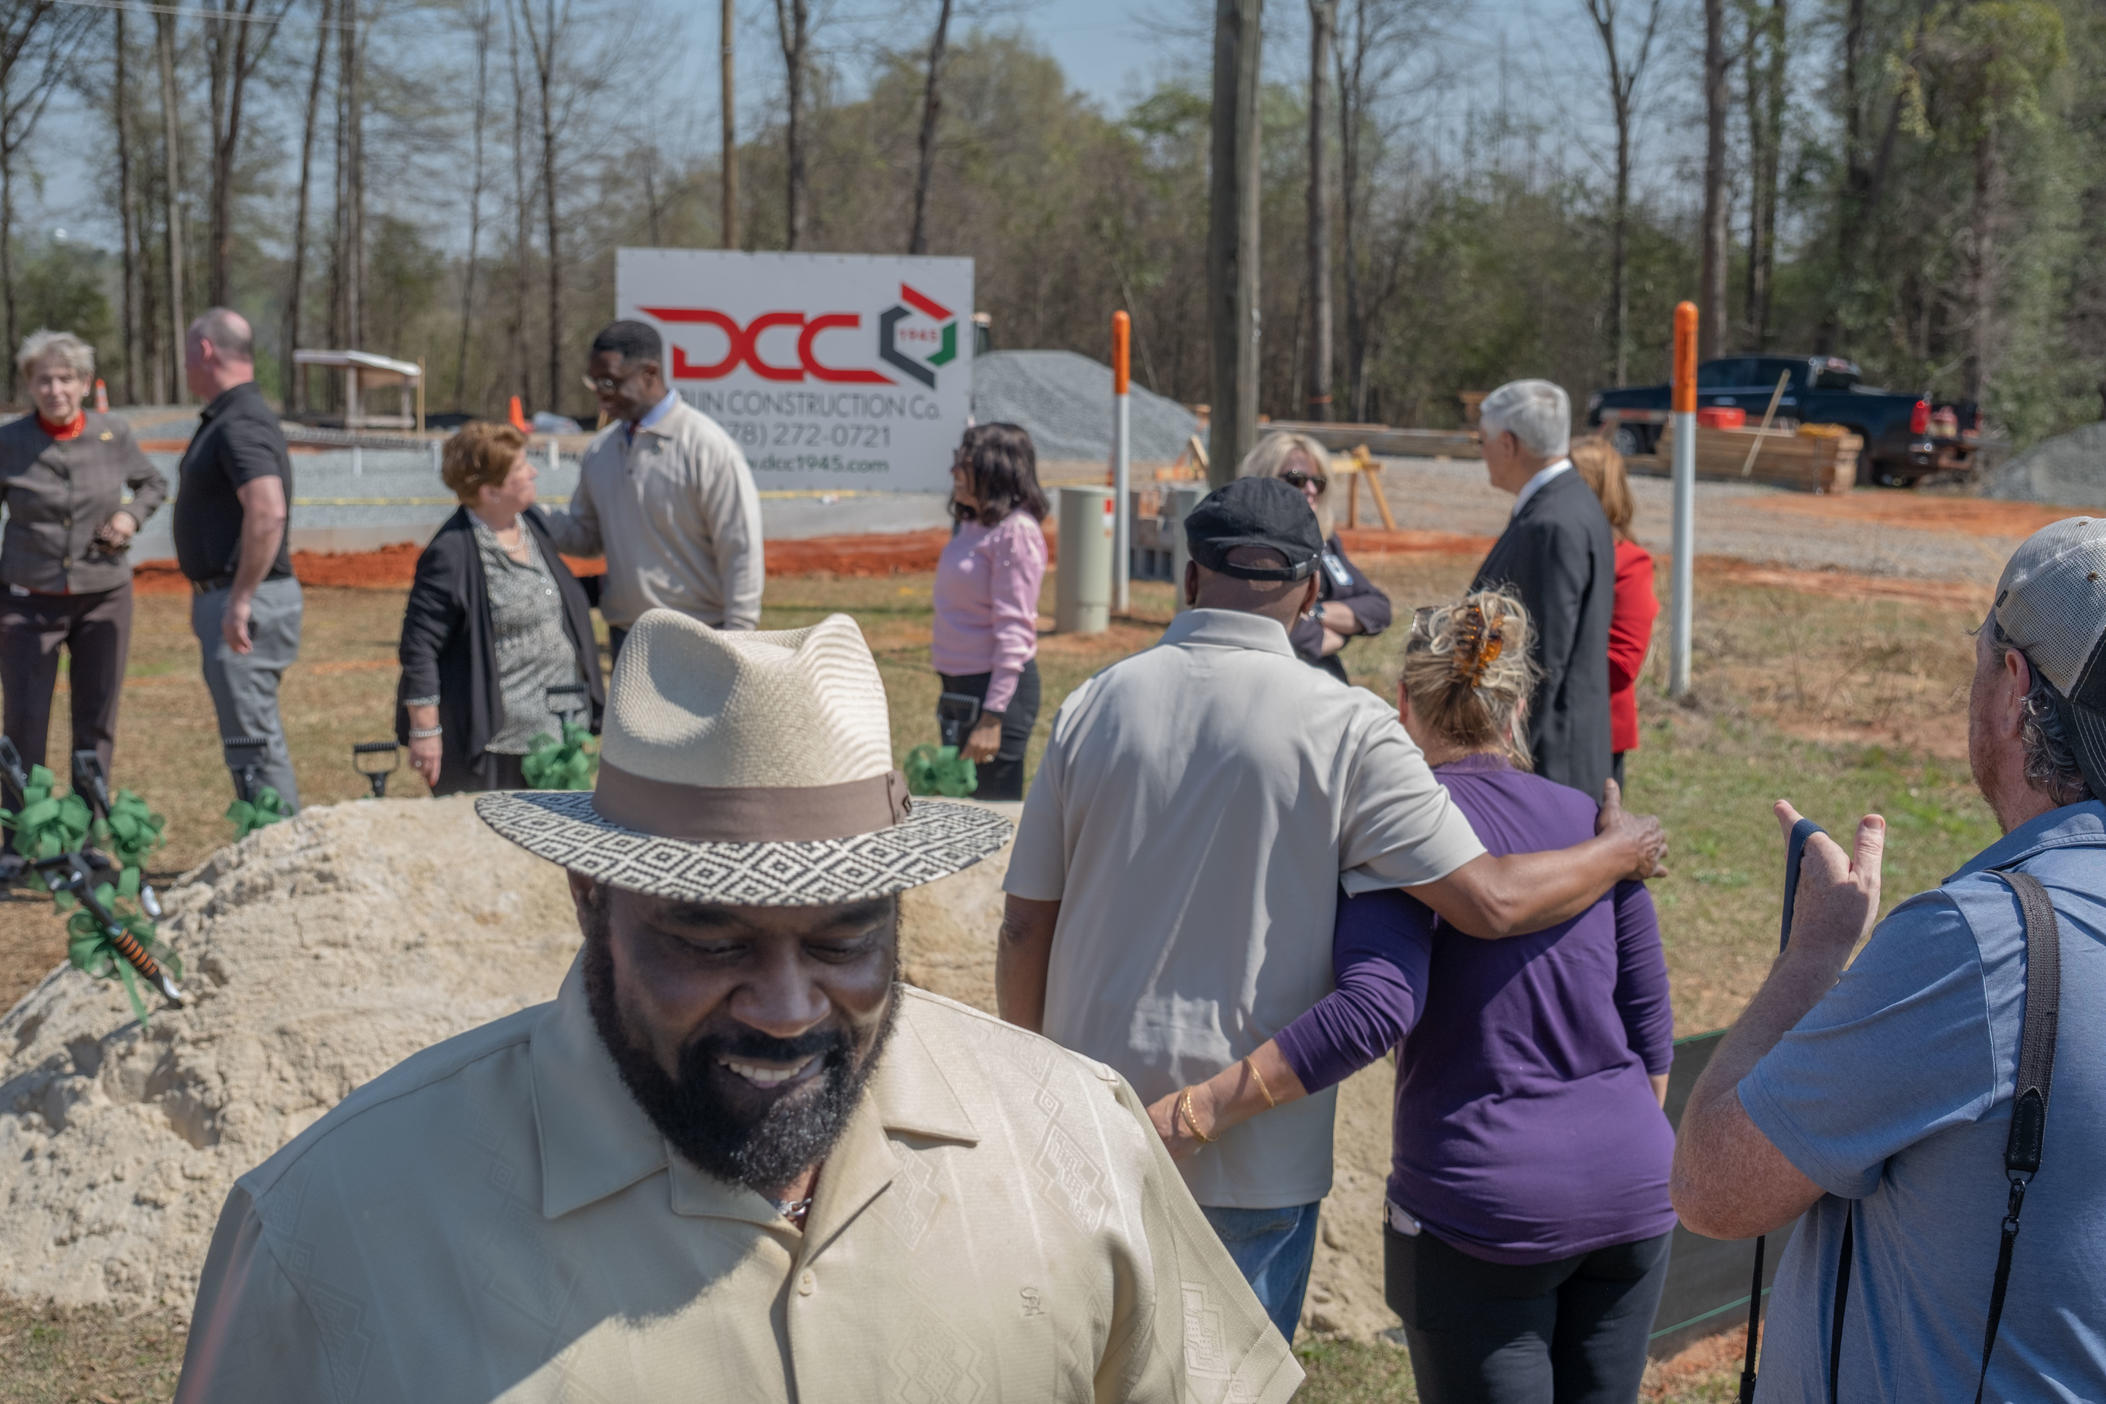 Community members and local leaders of Jeffersonville, Ga., gather at the groundbreaking of an expansion to the federally qualified health center in town.